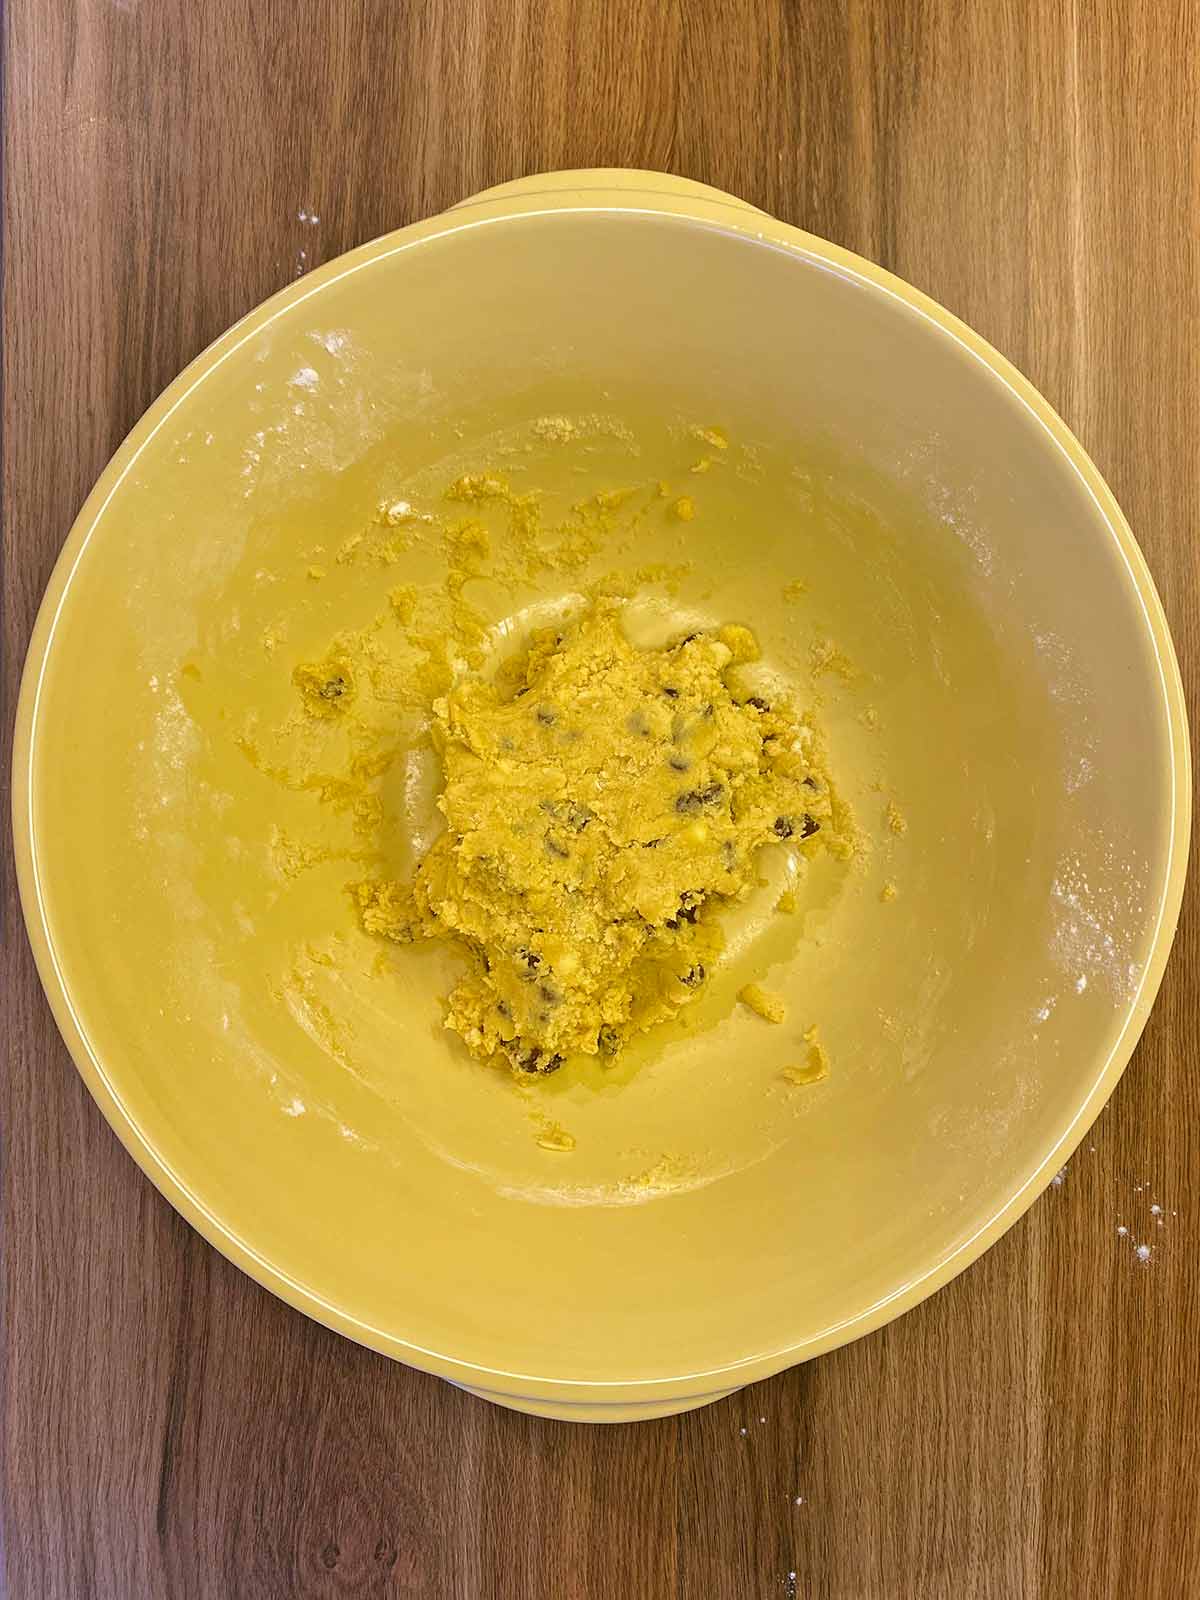 A ball of cookie dough in the bowl.